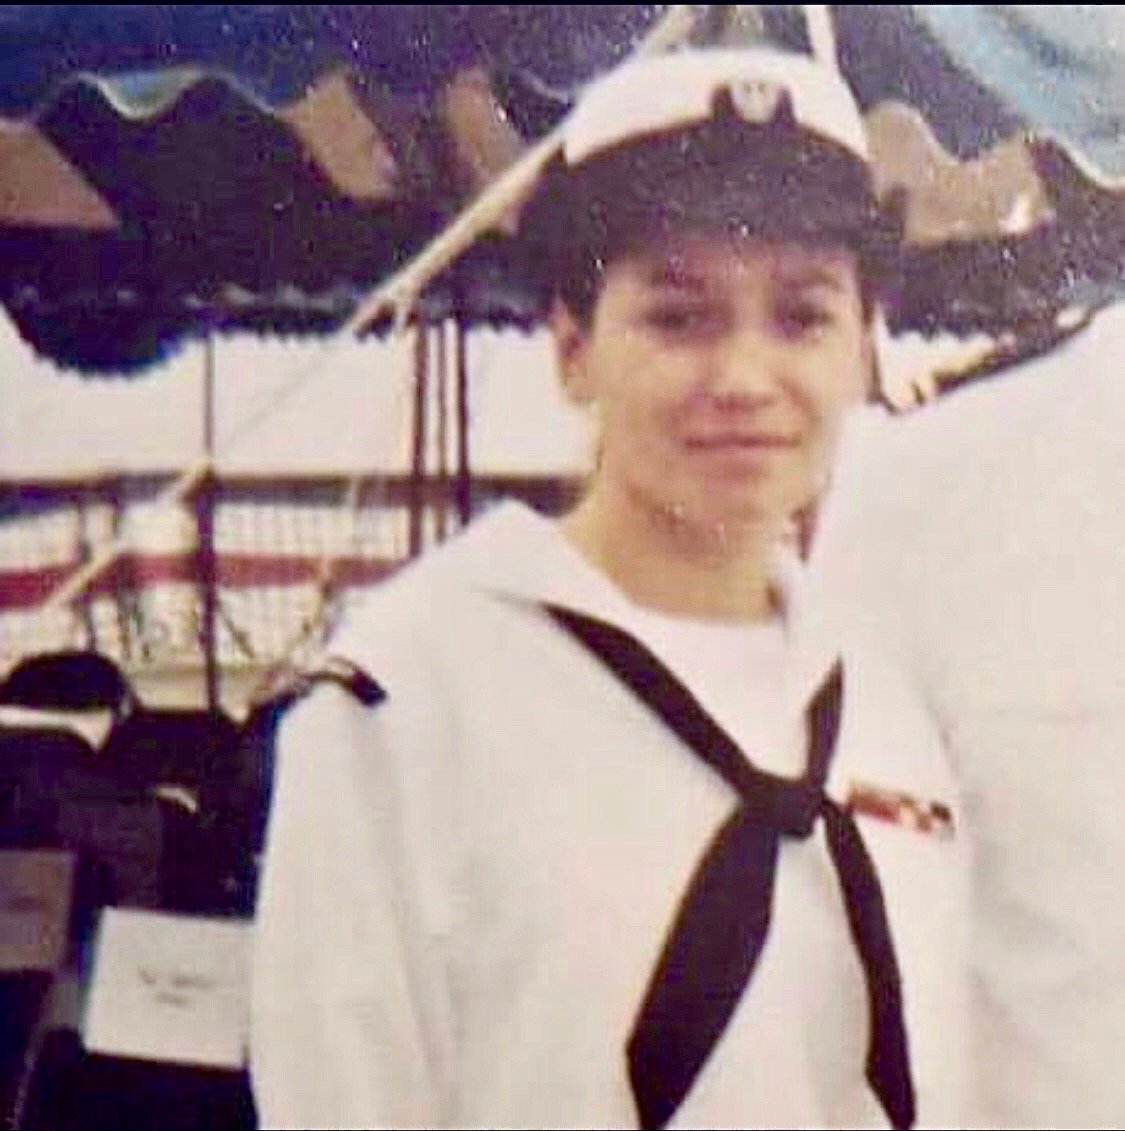 Adviya Rabchenia is proud of the U.S. Navy uniform that she wore as she faithfully served her new country.